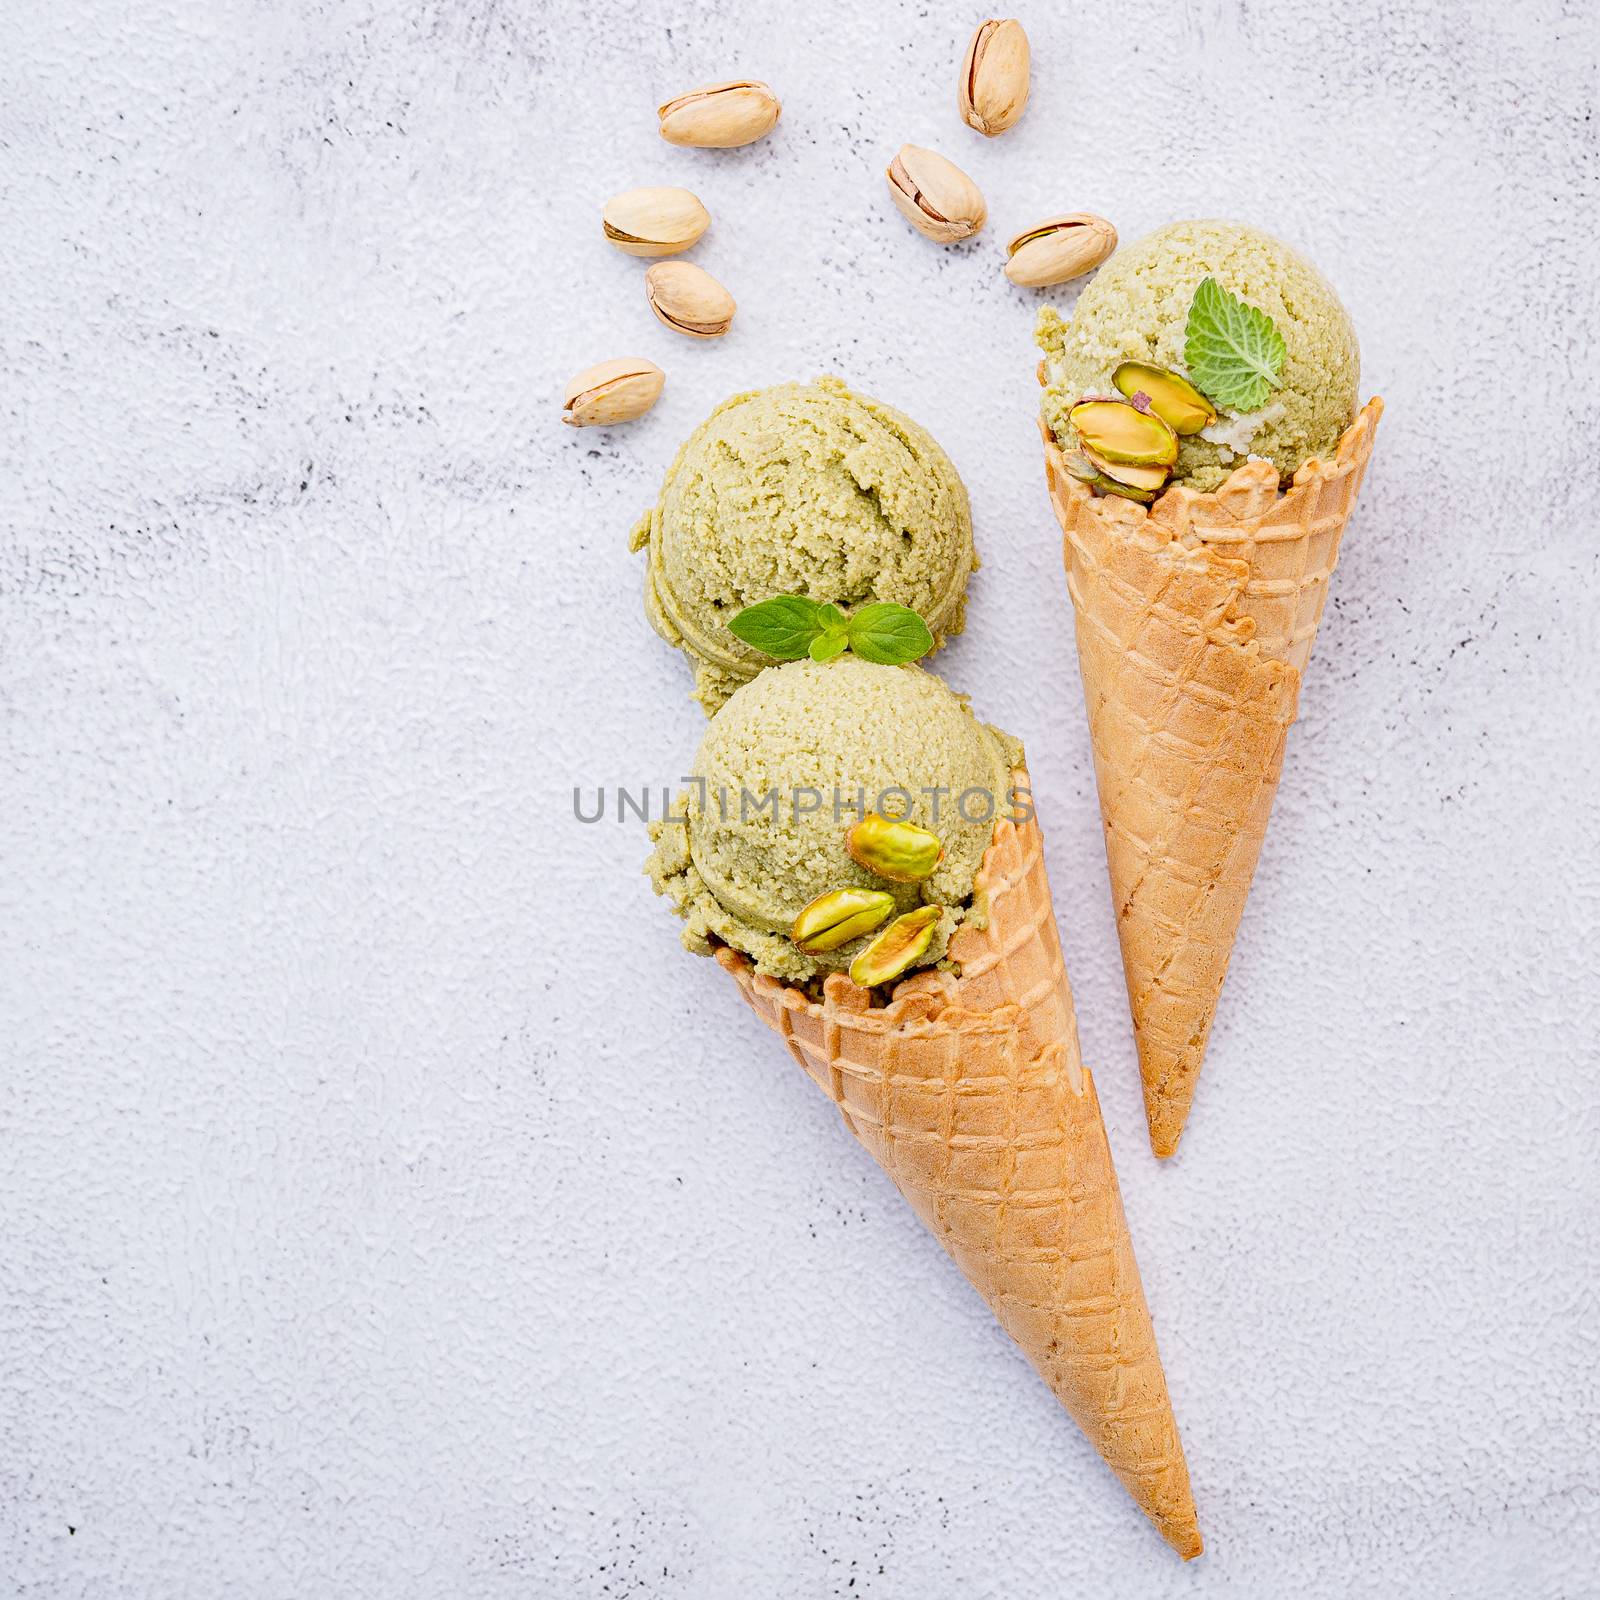 Pistachio ice cream in cones  with pistachio nuts setup on white by kerdkanno